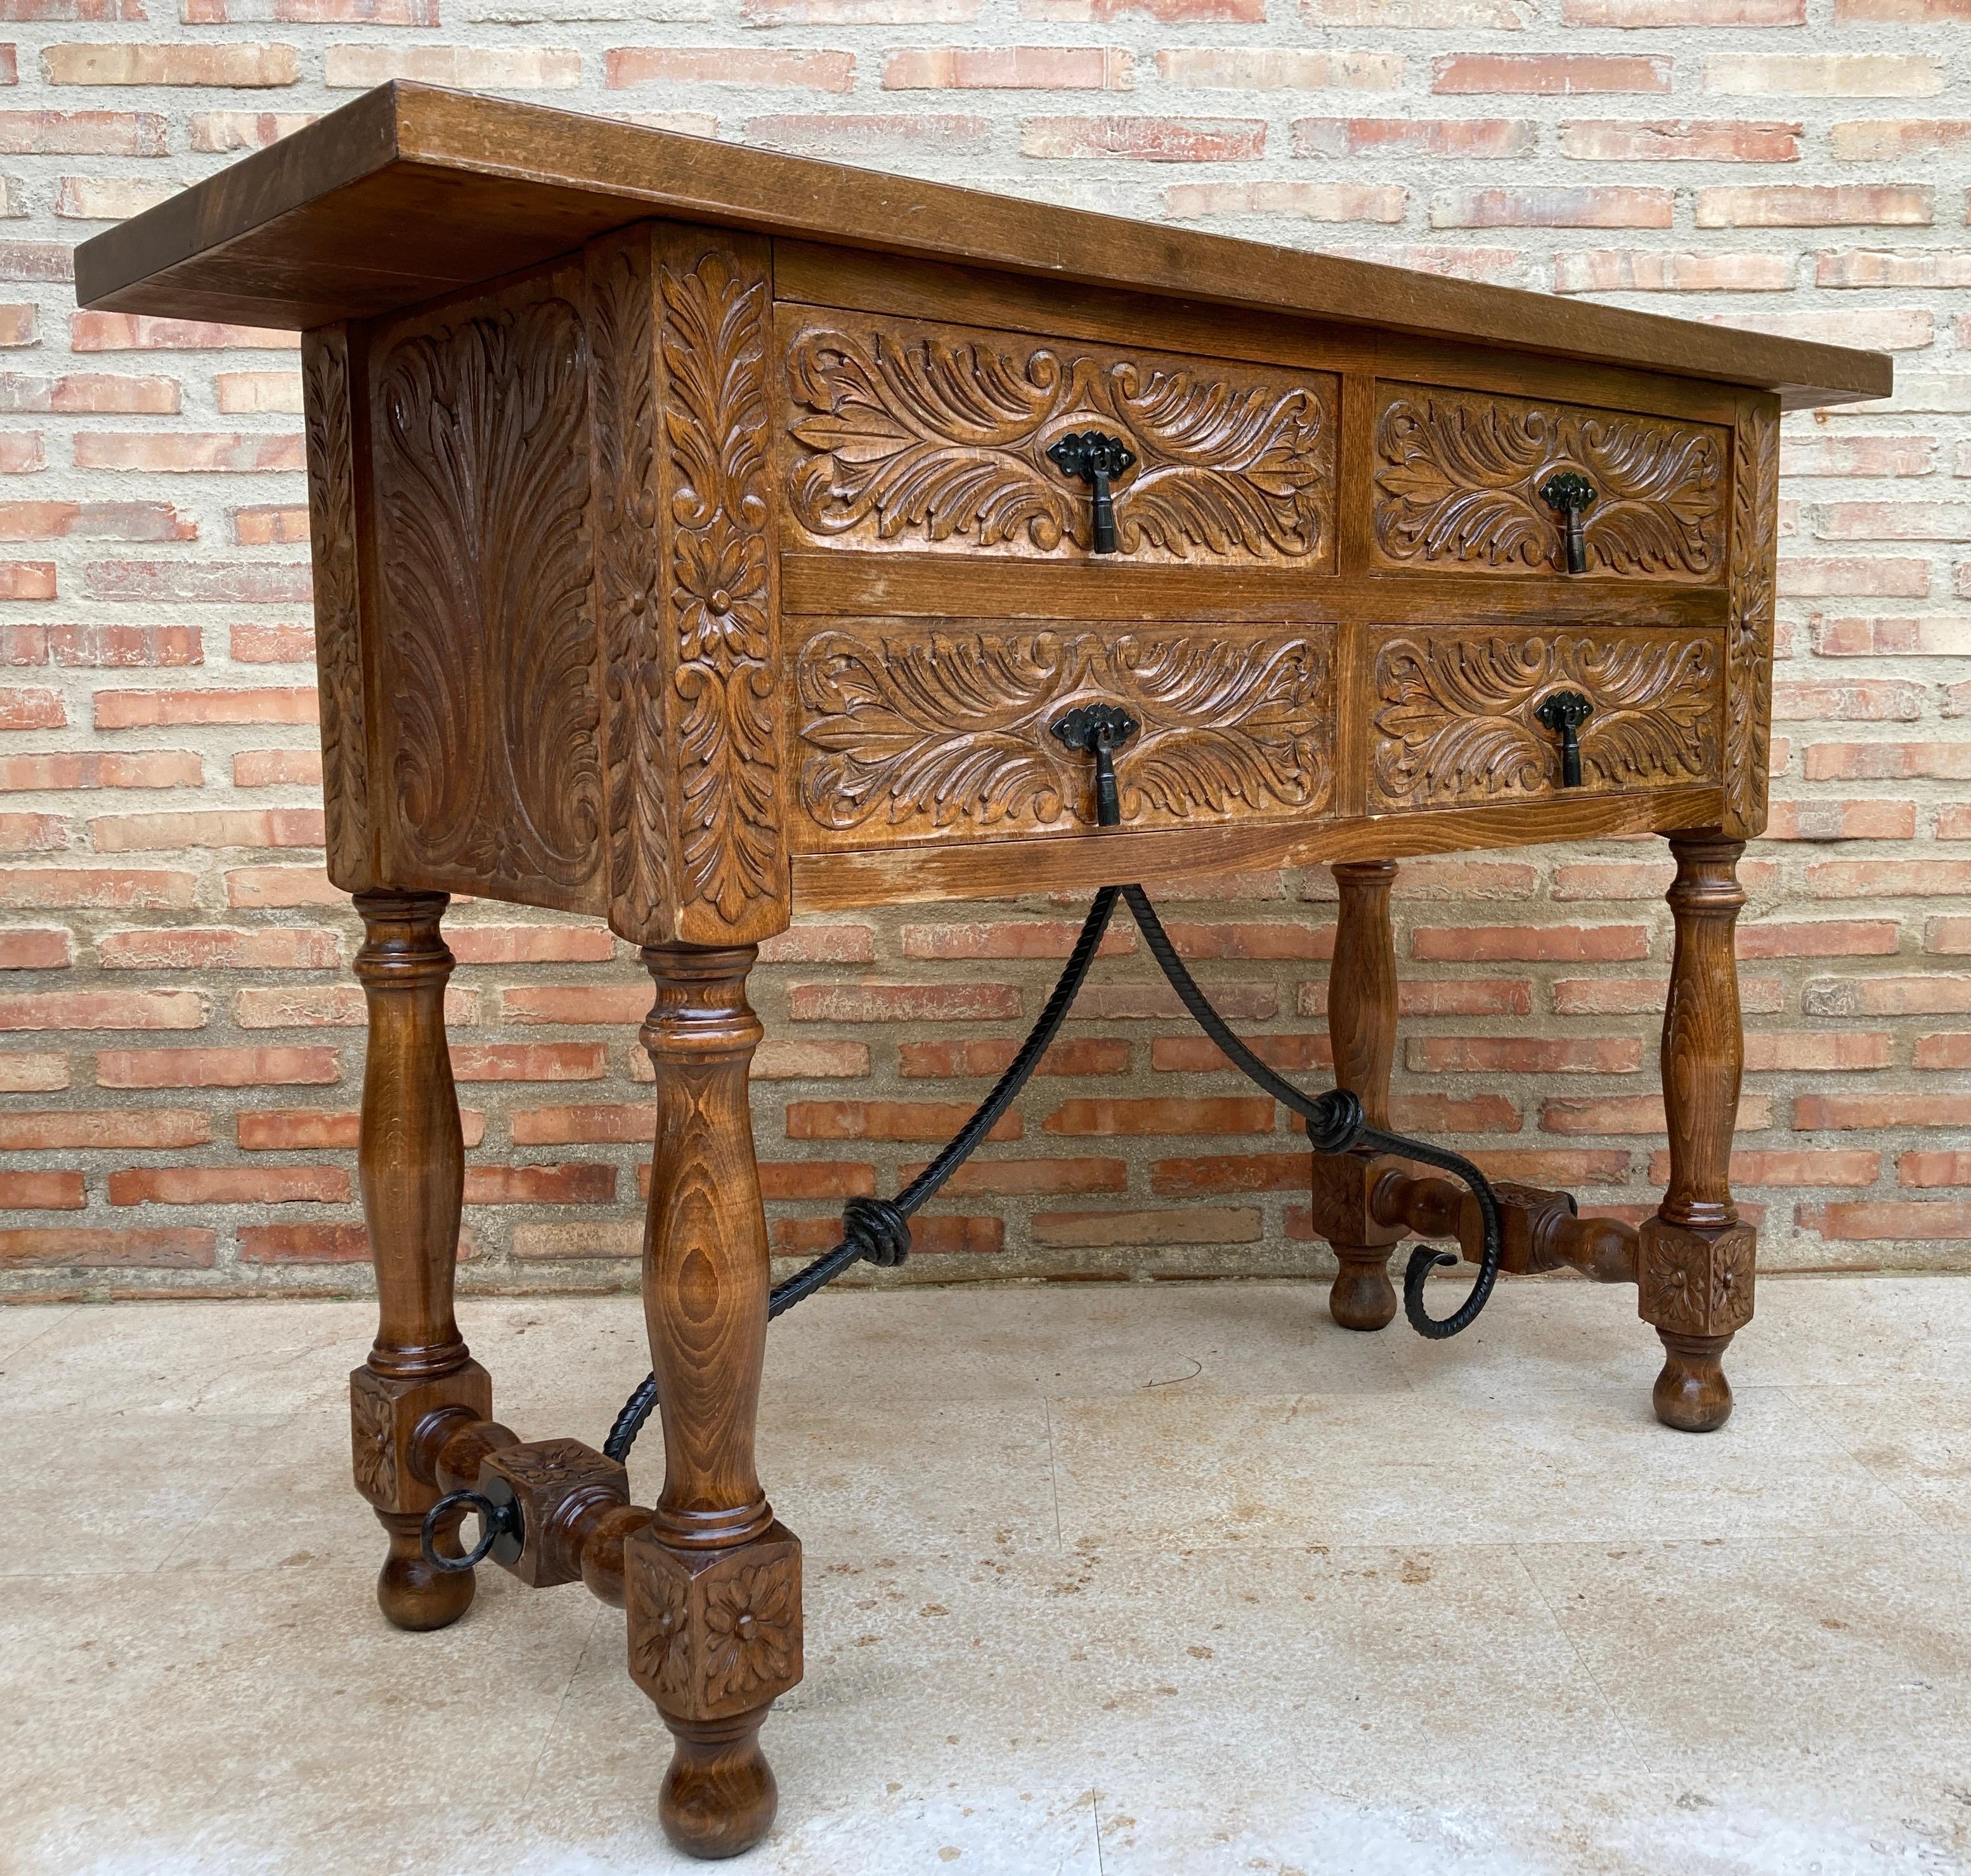 20th century Spanish carved walnut console sofa table with four drawers and iron stretcher 
You can use like a commode or chest of drawers 
This elegant antique walnut console was crafted in Spain, circa 1900. The sofa table with four legs and